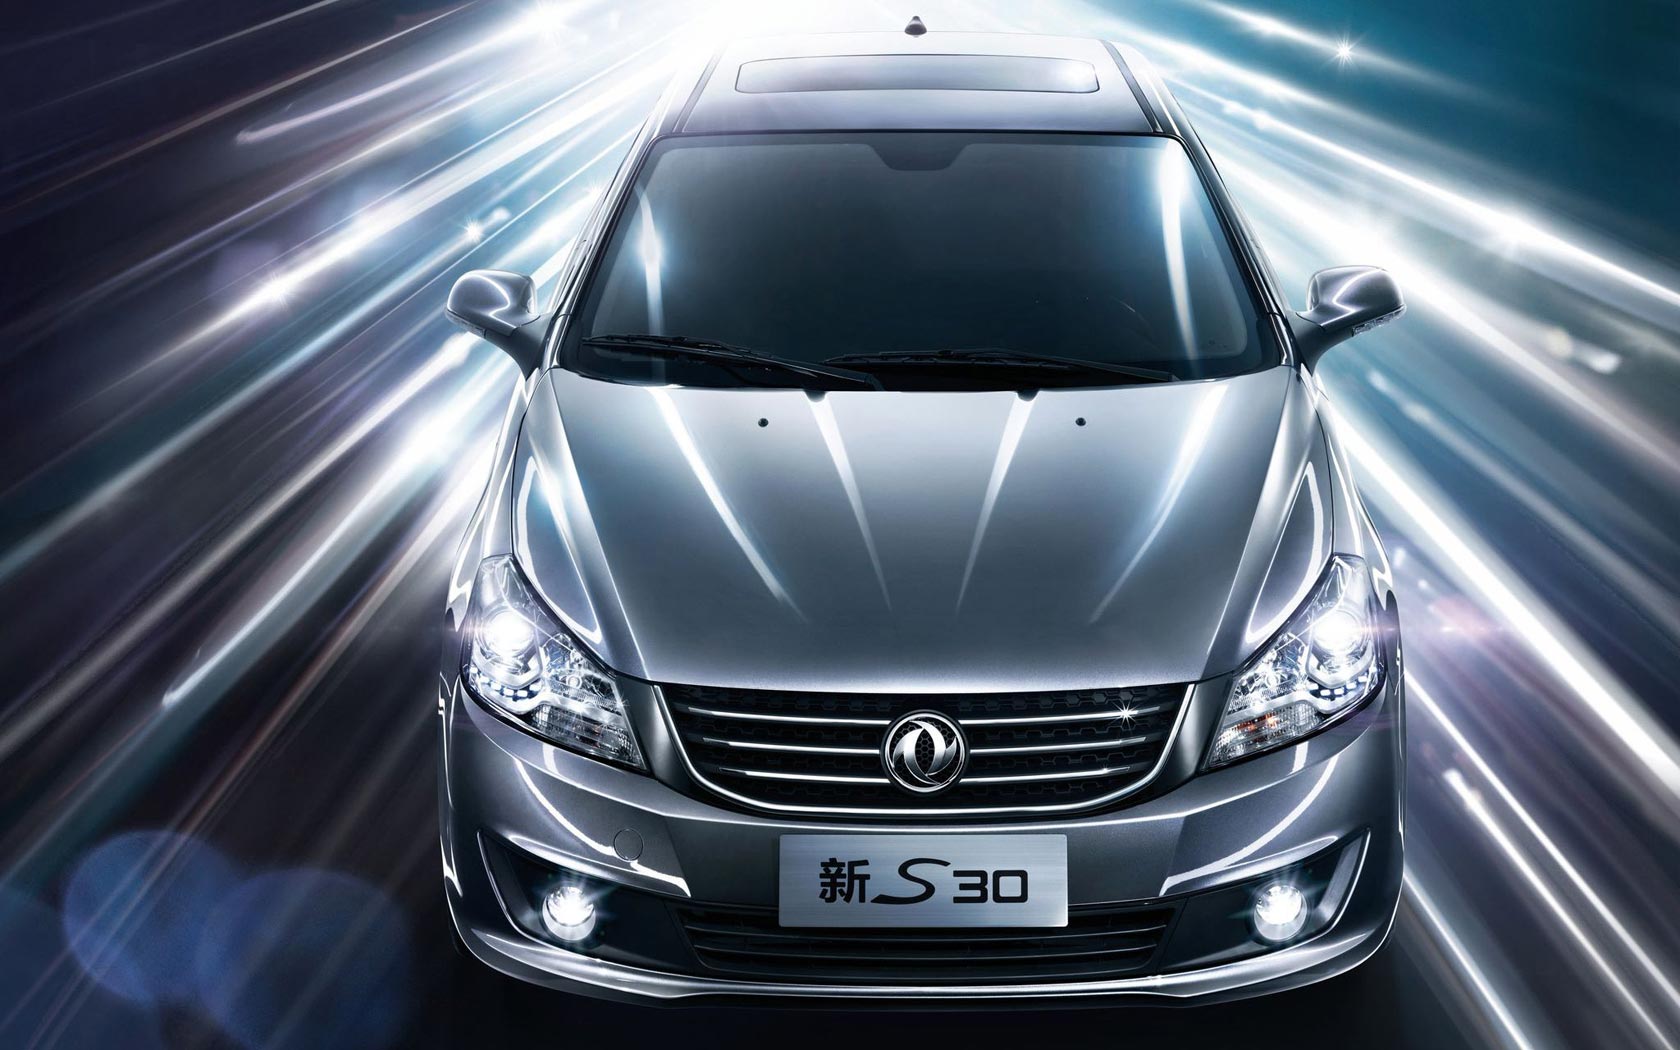  DongFeng S30 